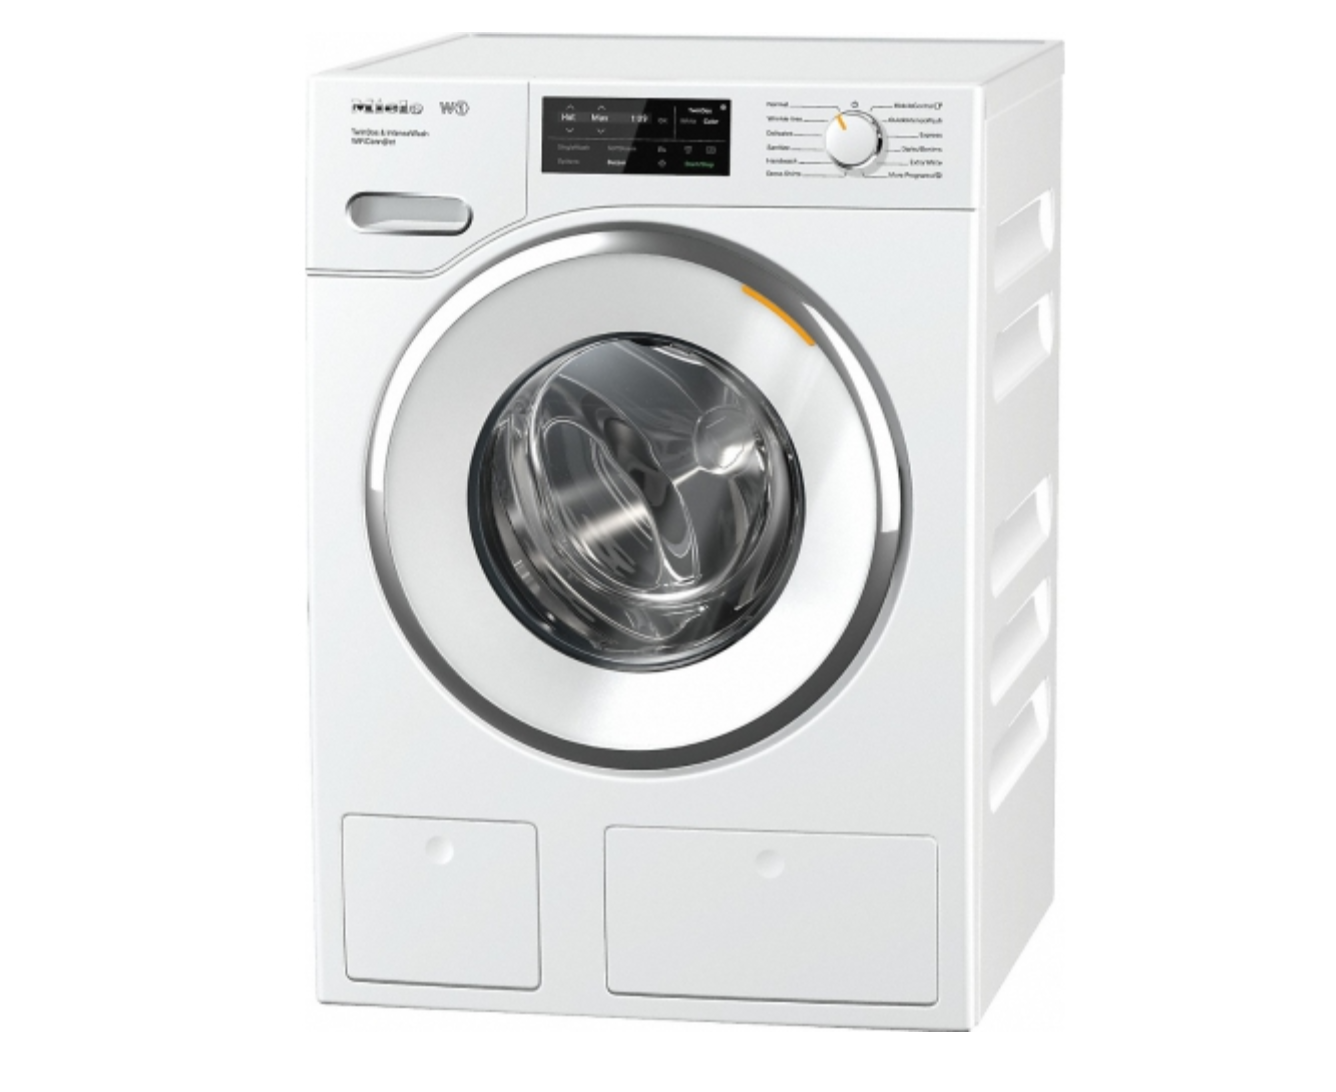 Wi-Fi washer and dryer